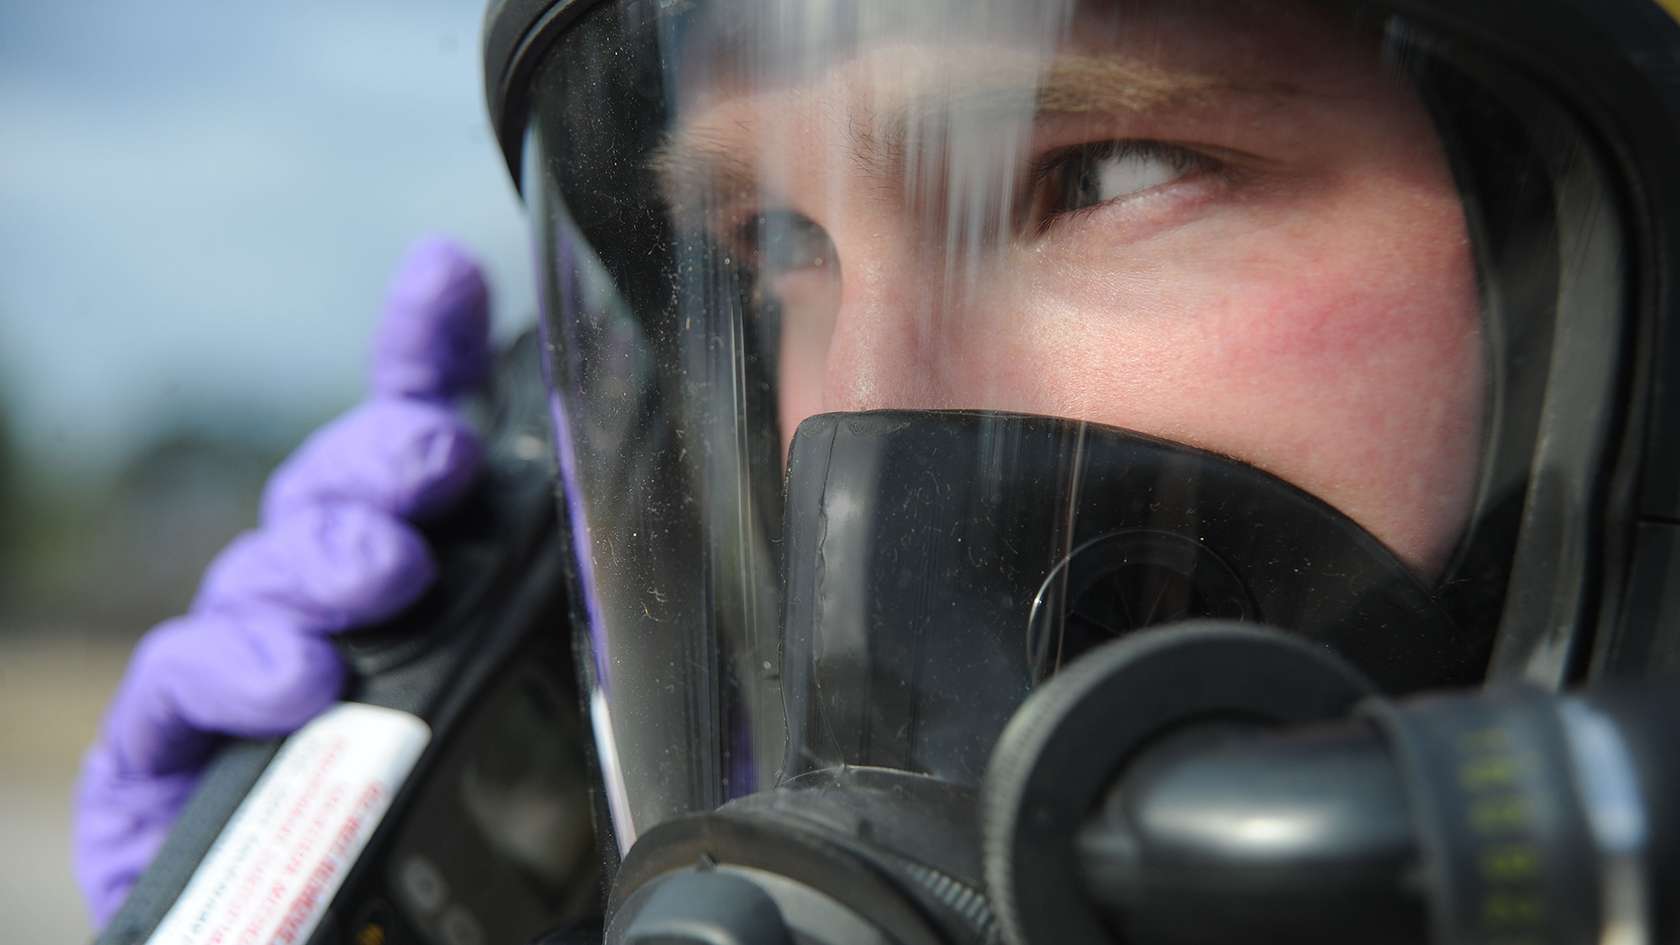 airman's face wearing protective face mask